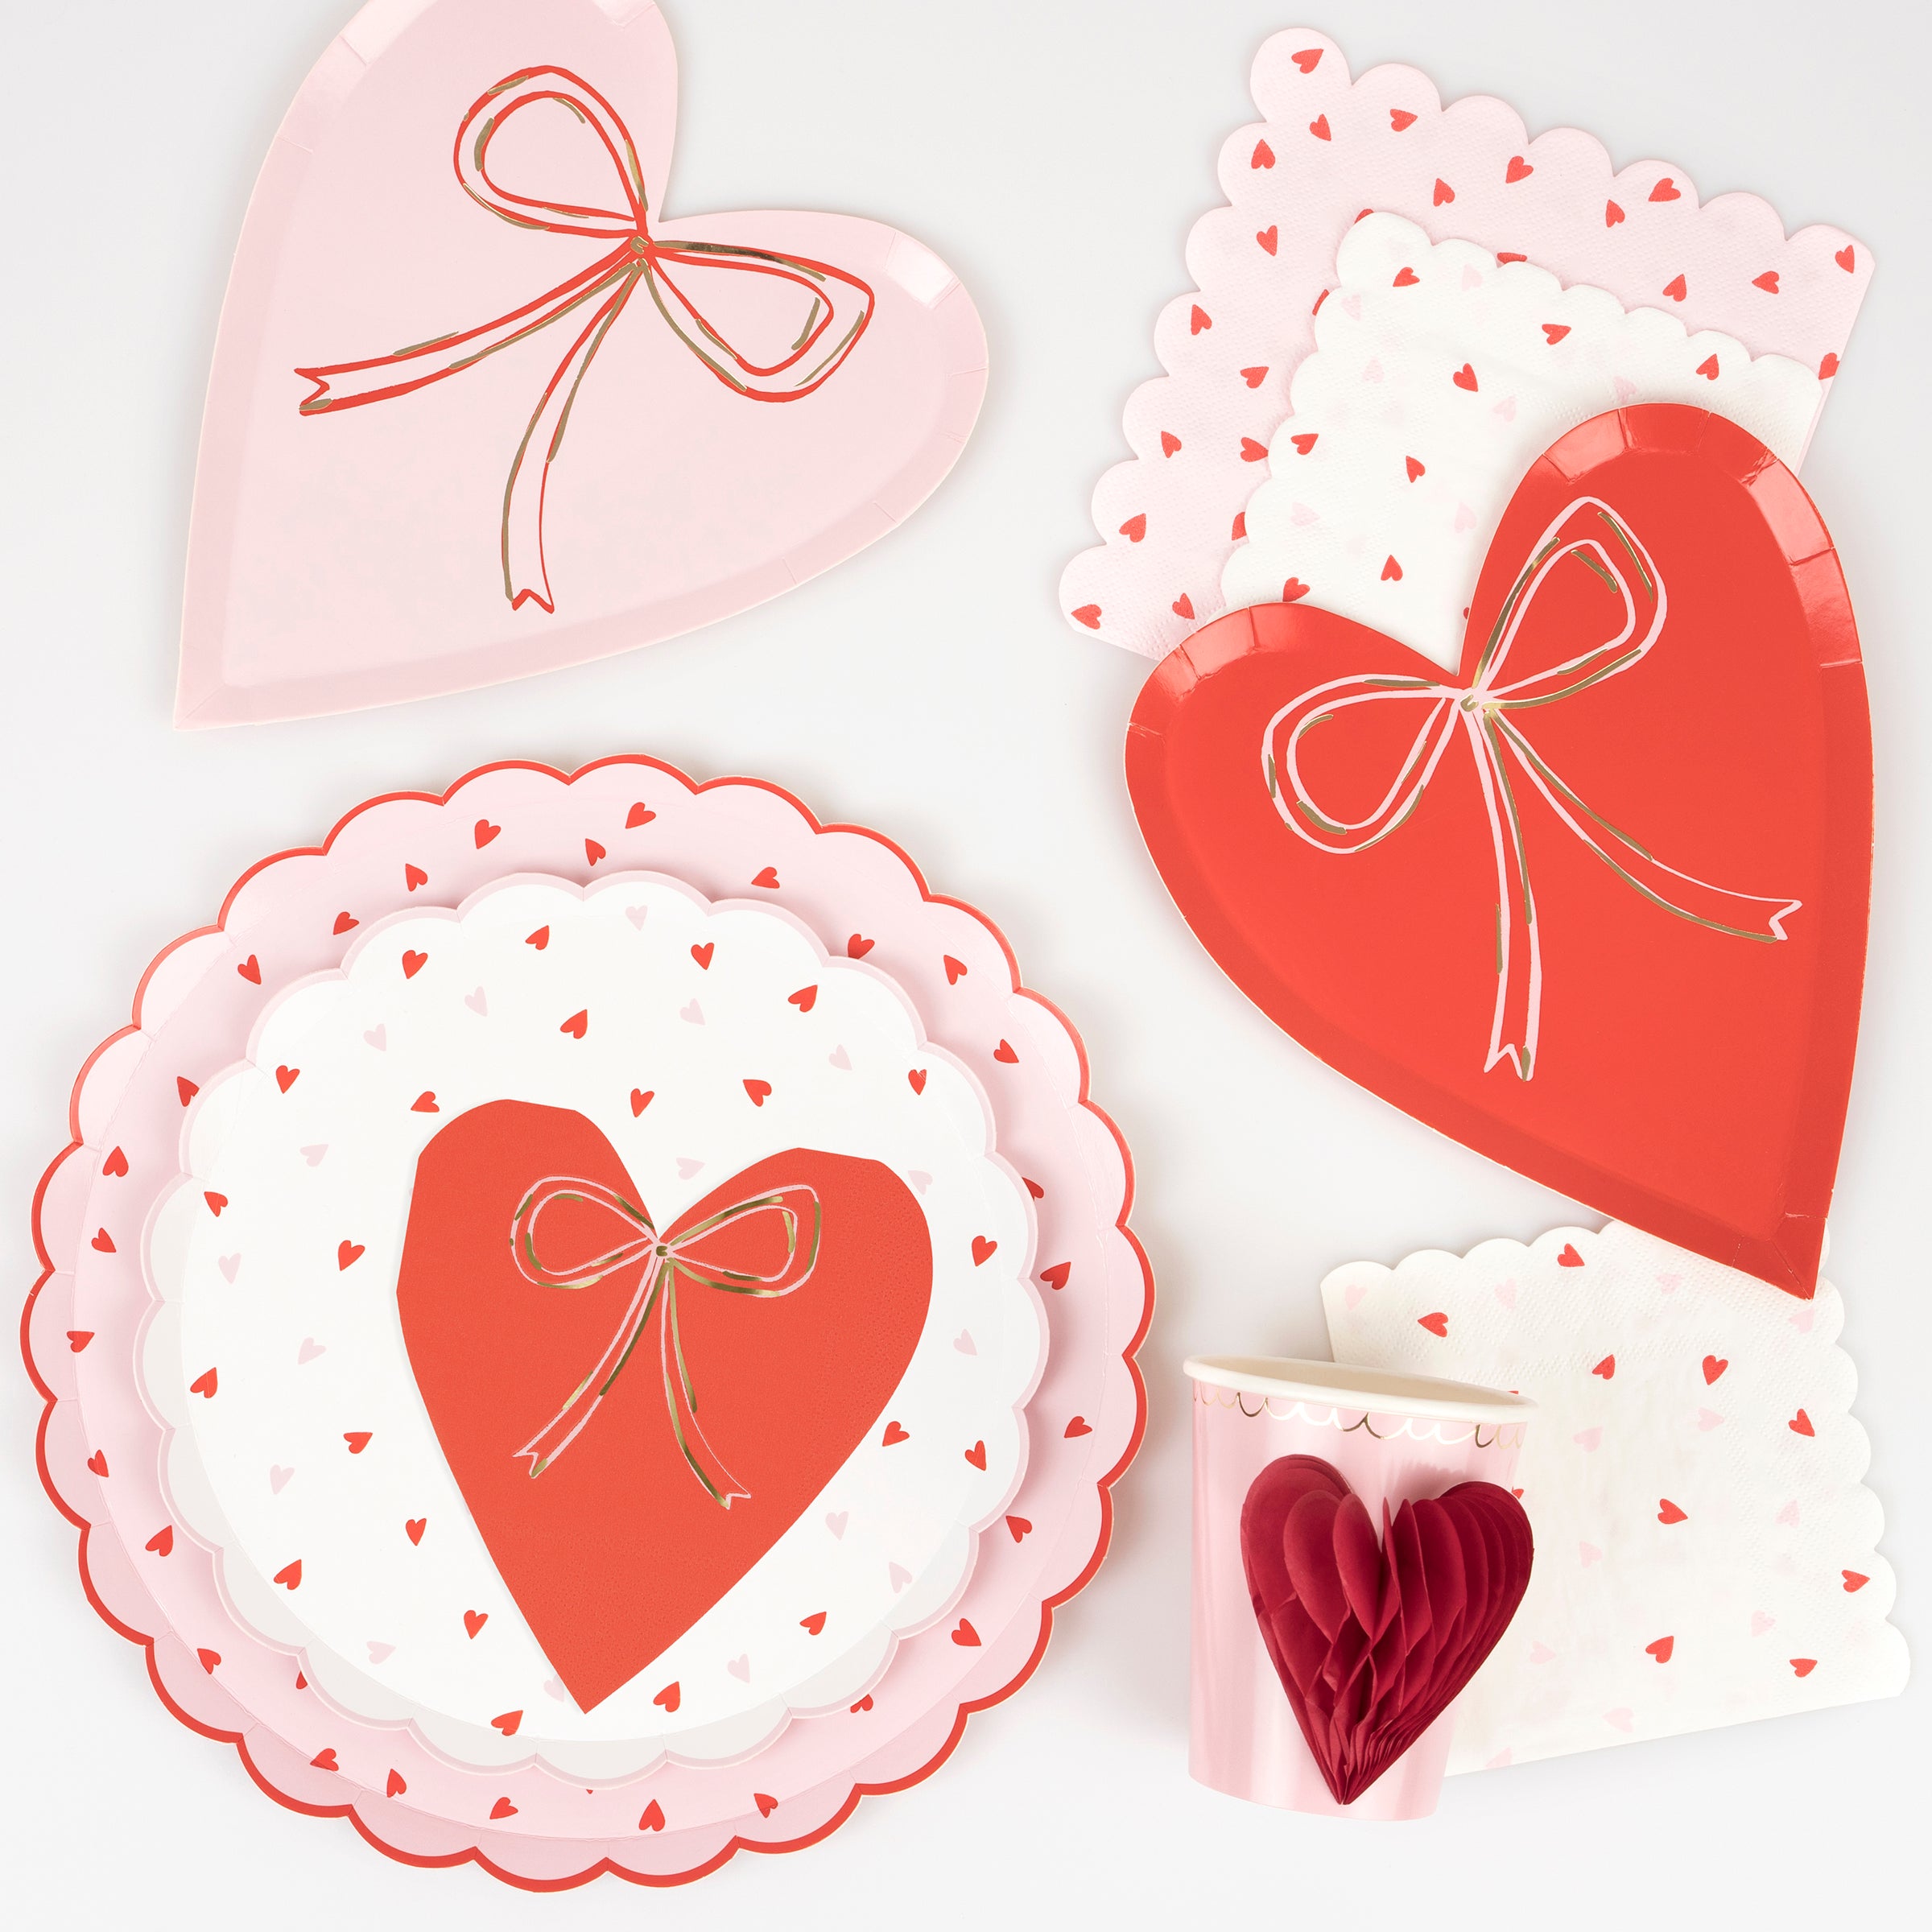 Our party napkins, with love hearts and a scalloped border, give a lovely vintage look for Valentines.